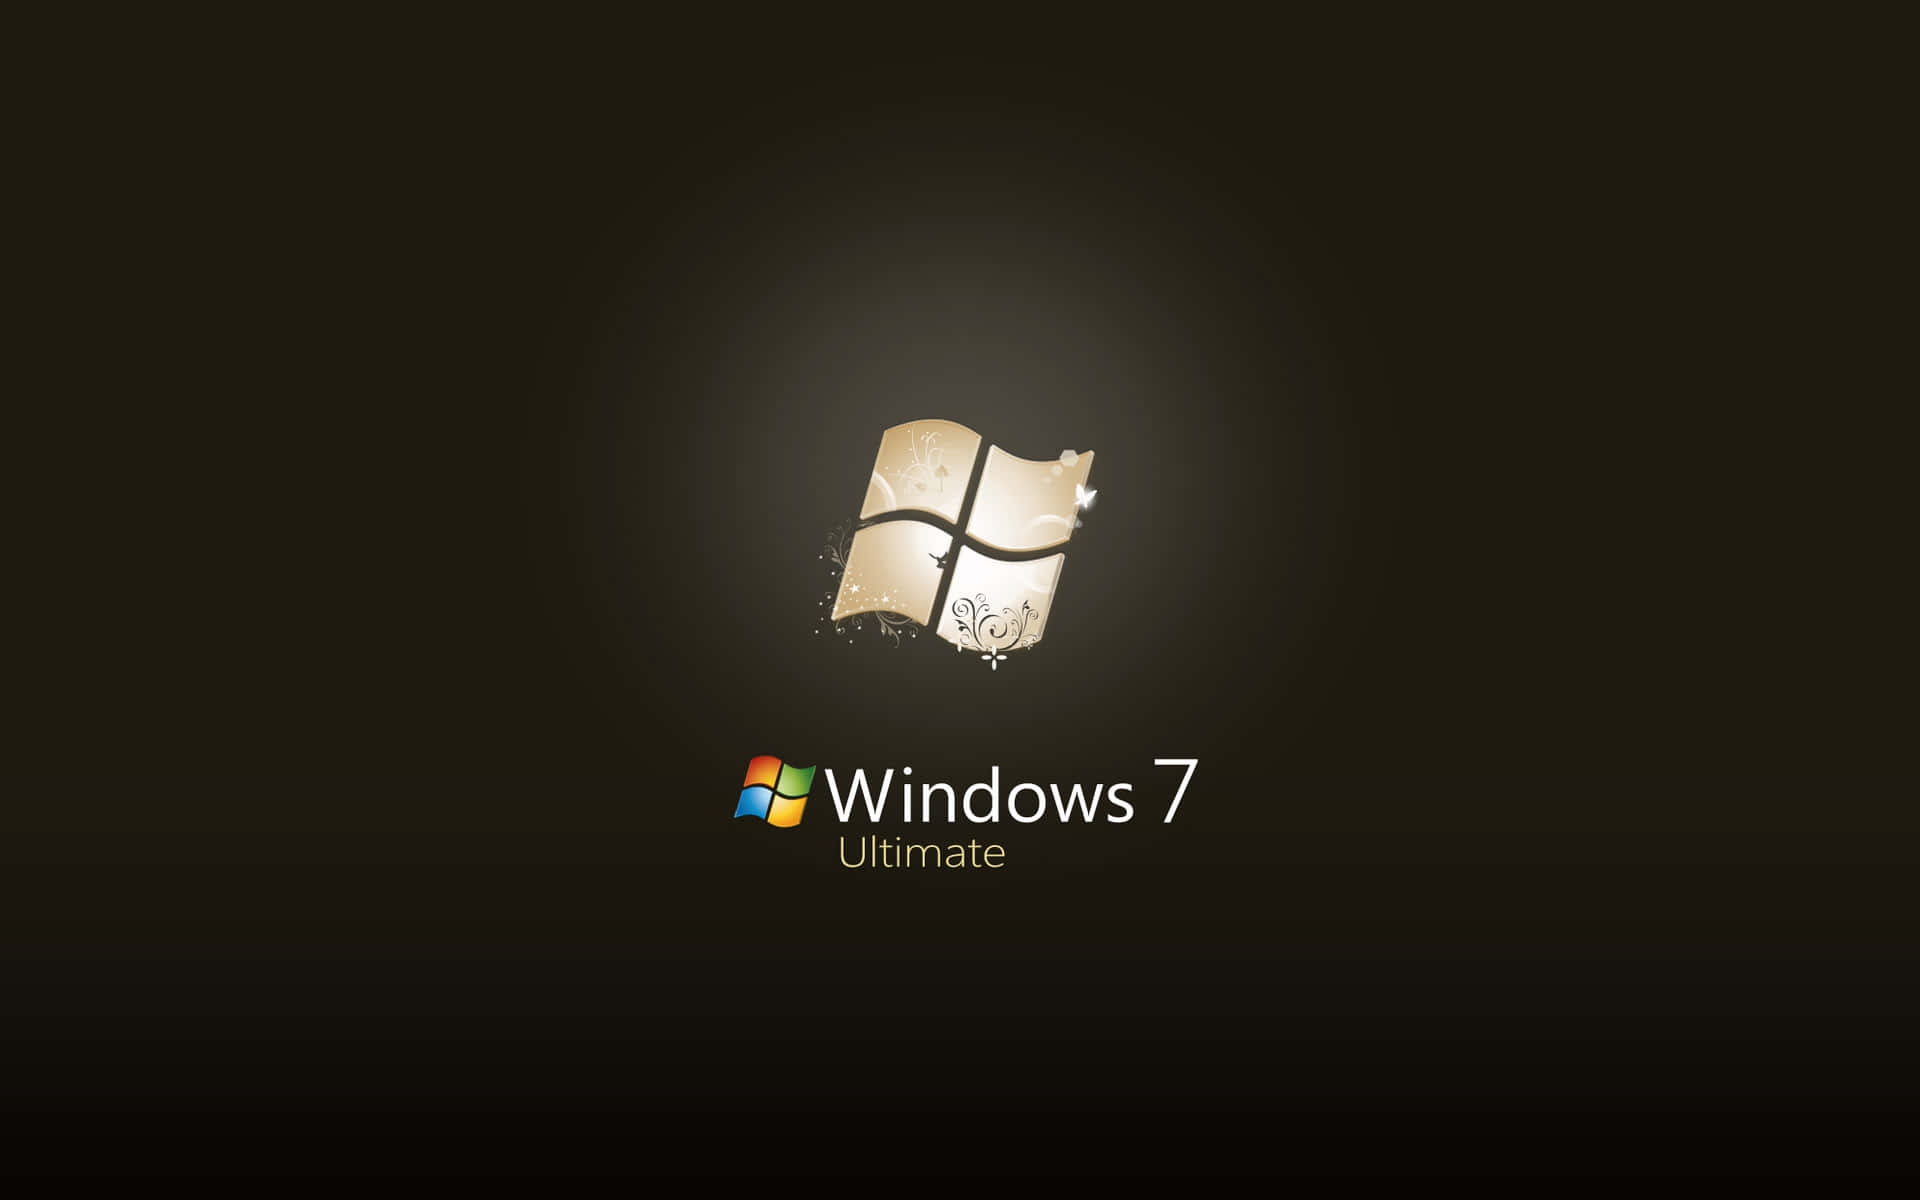 Experience Simplicity With Windows 7